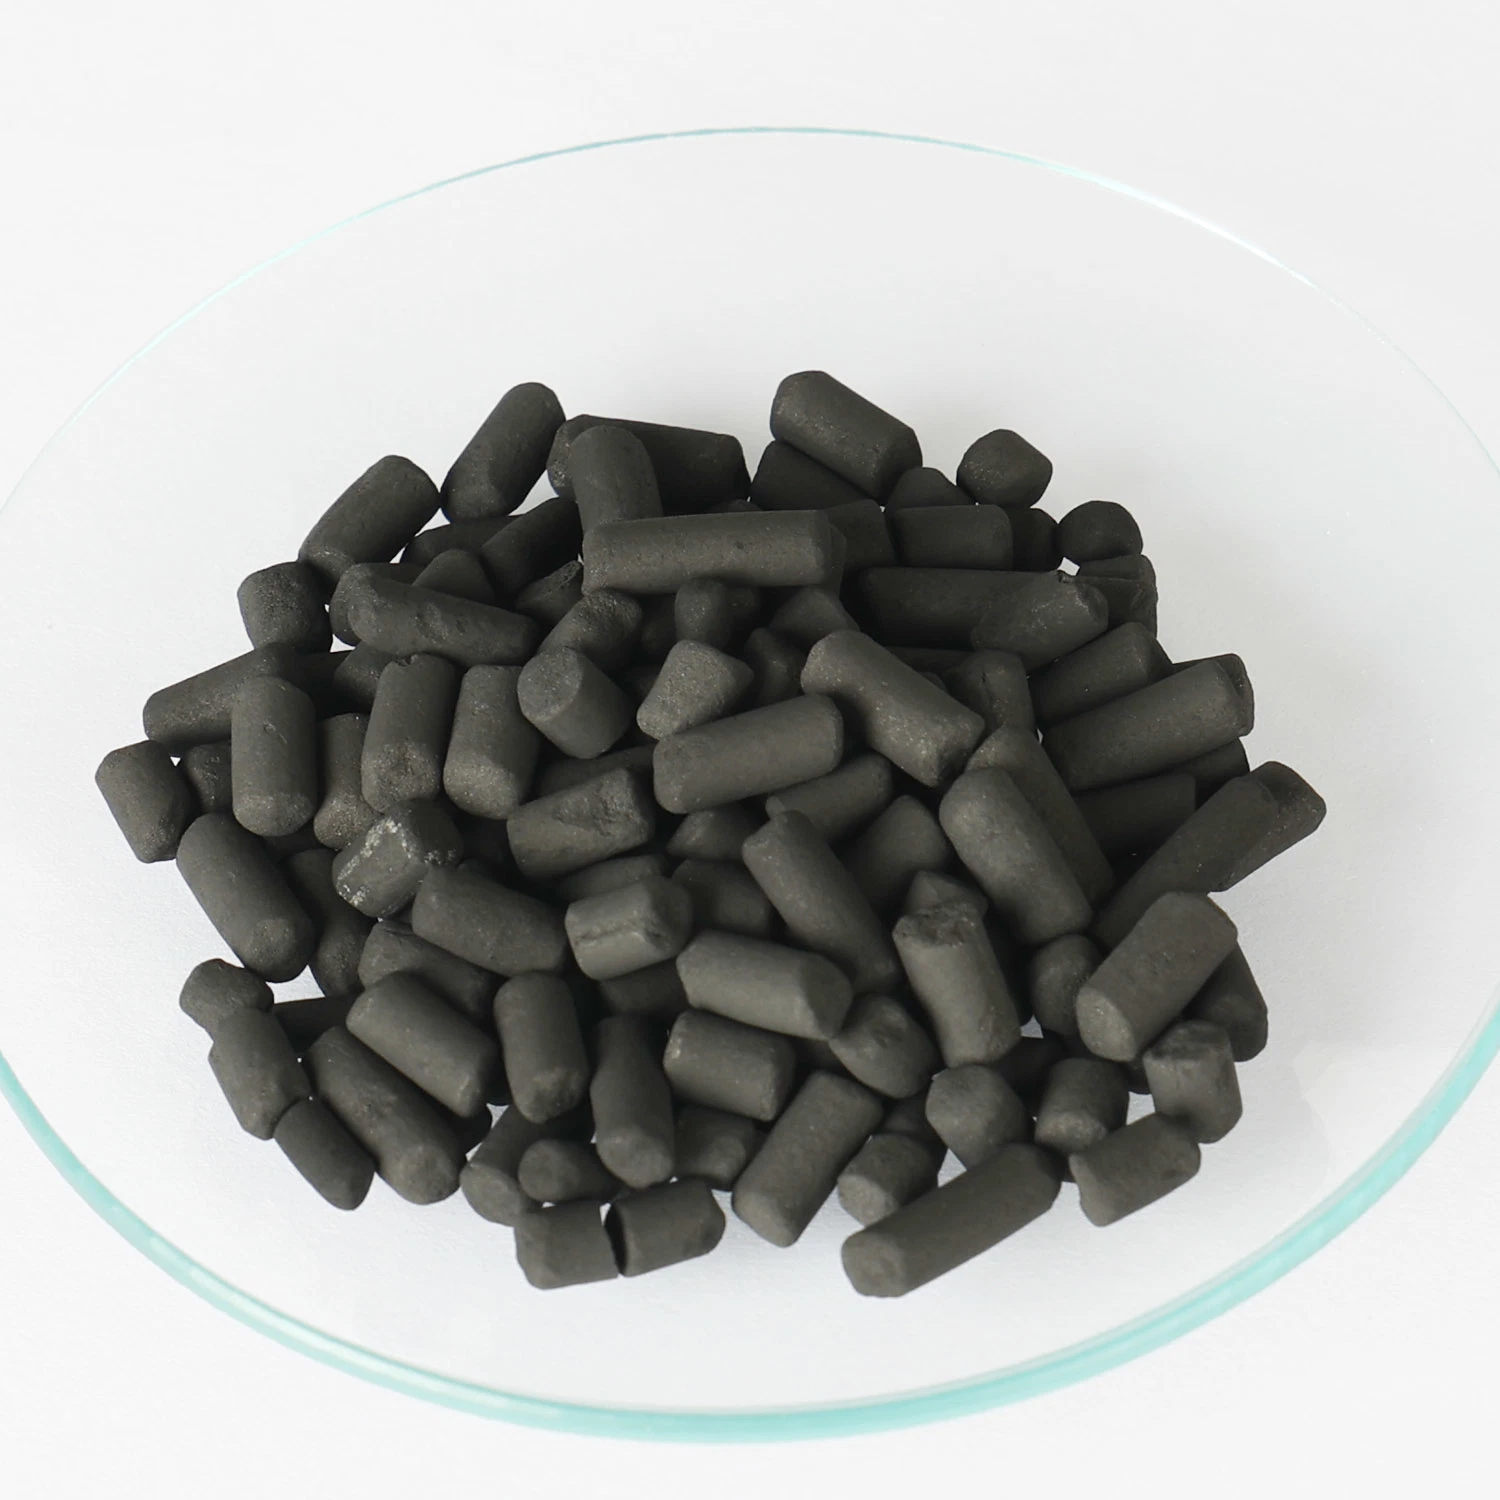 10 Percent Moisture Content Black Coal Columnar Activated Carbon Produced for Usage in Organic Gas Adsorption